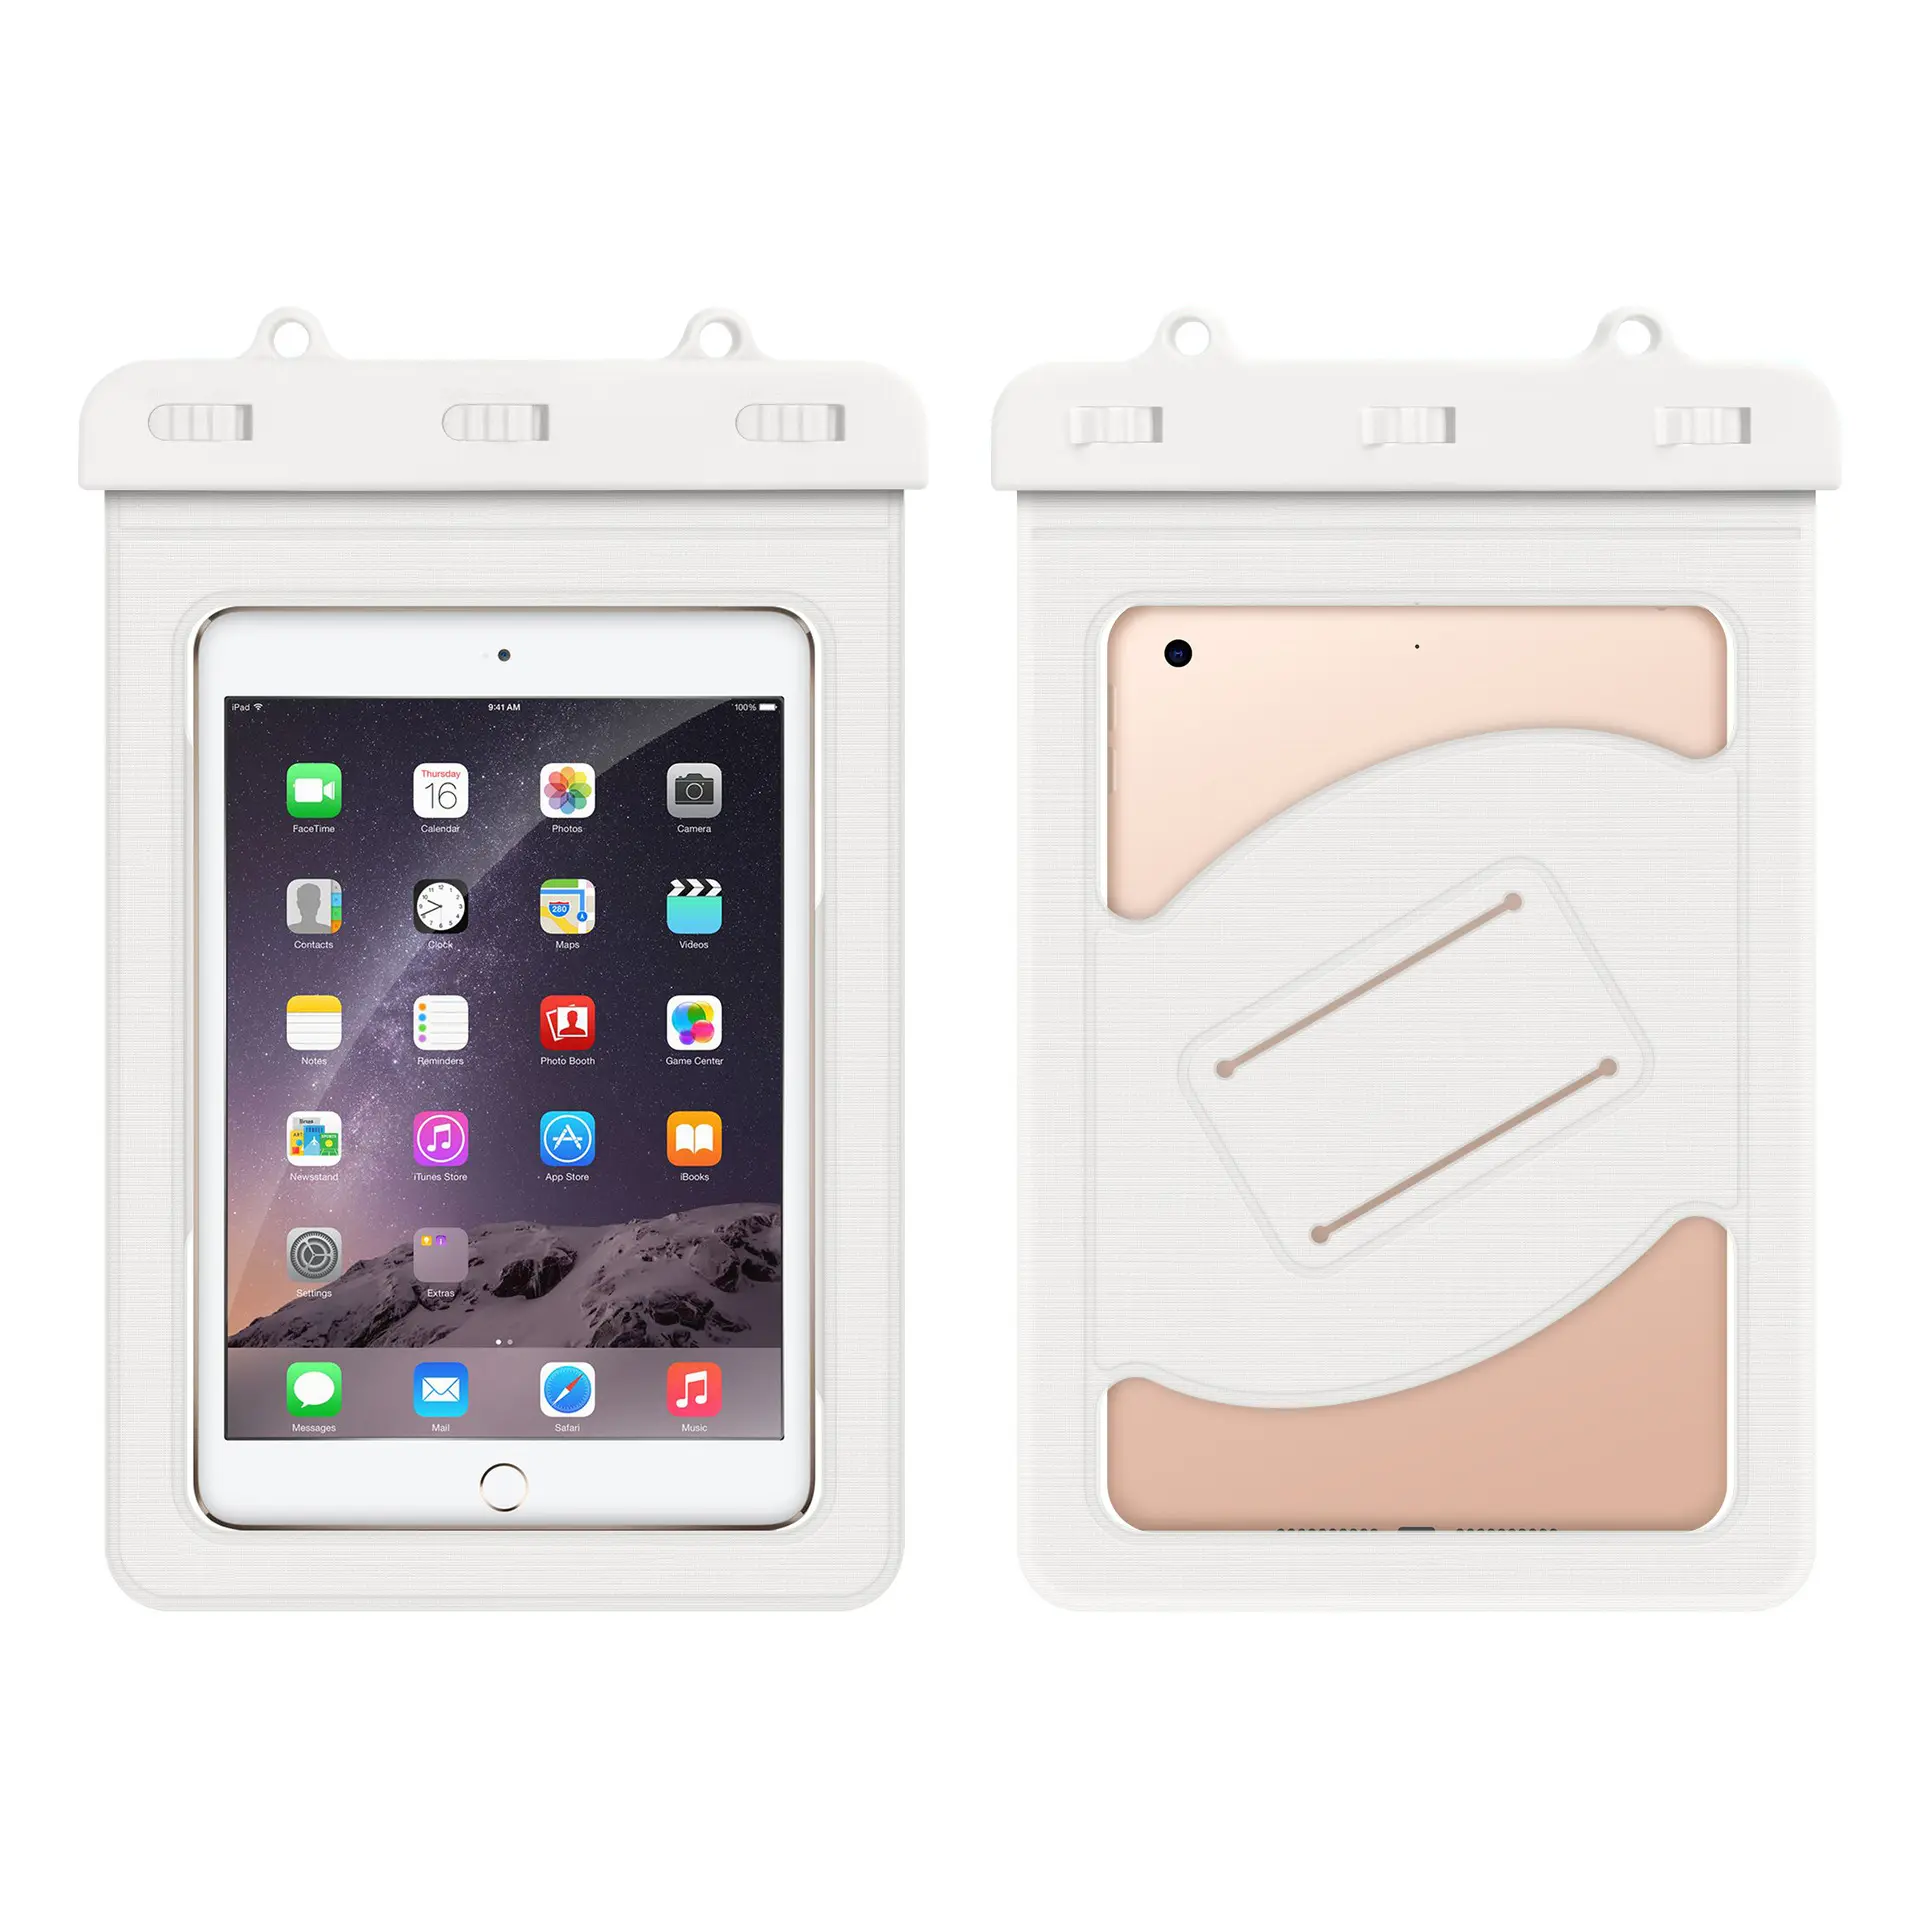 Hot sell waterproof Bag For ipad Mini 2 With Big Window Design Waterproof Case For Tablet